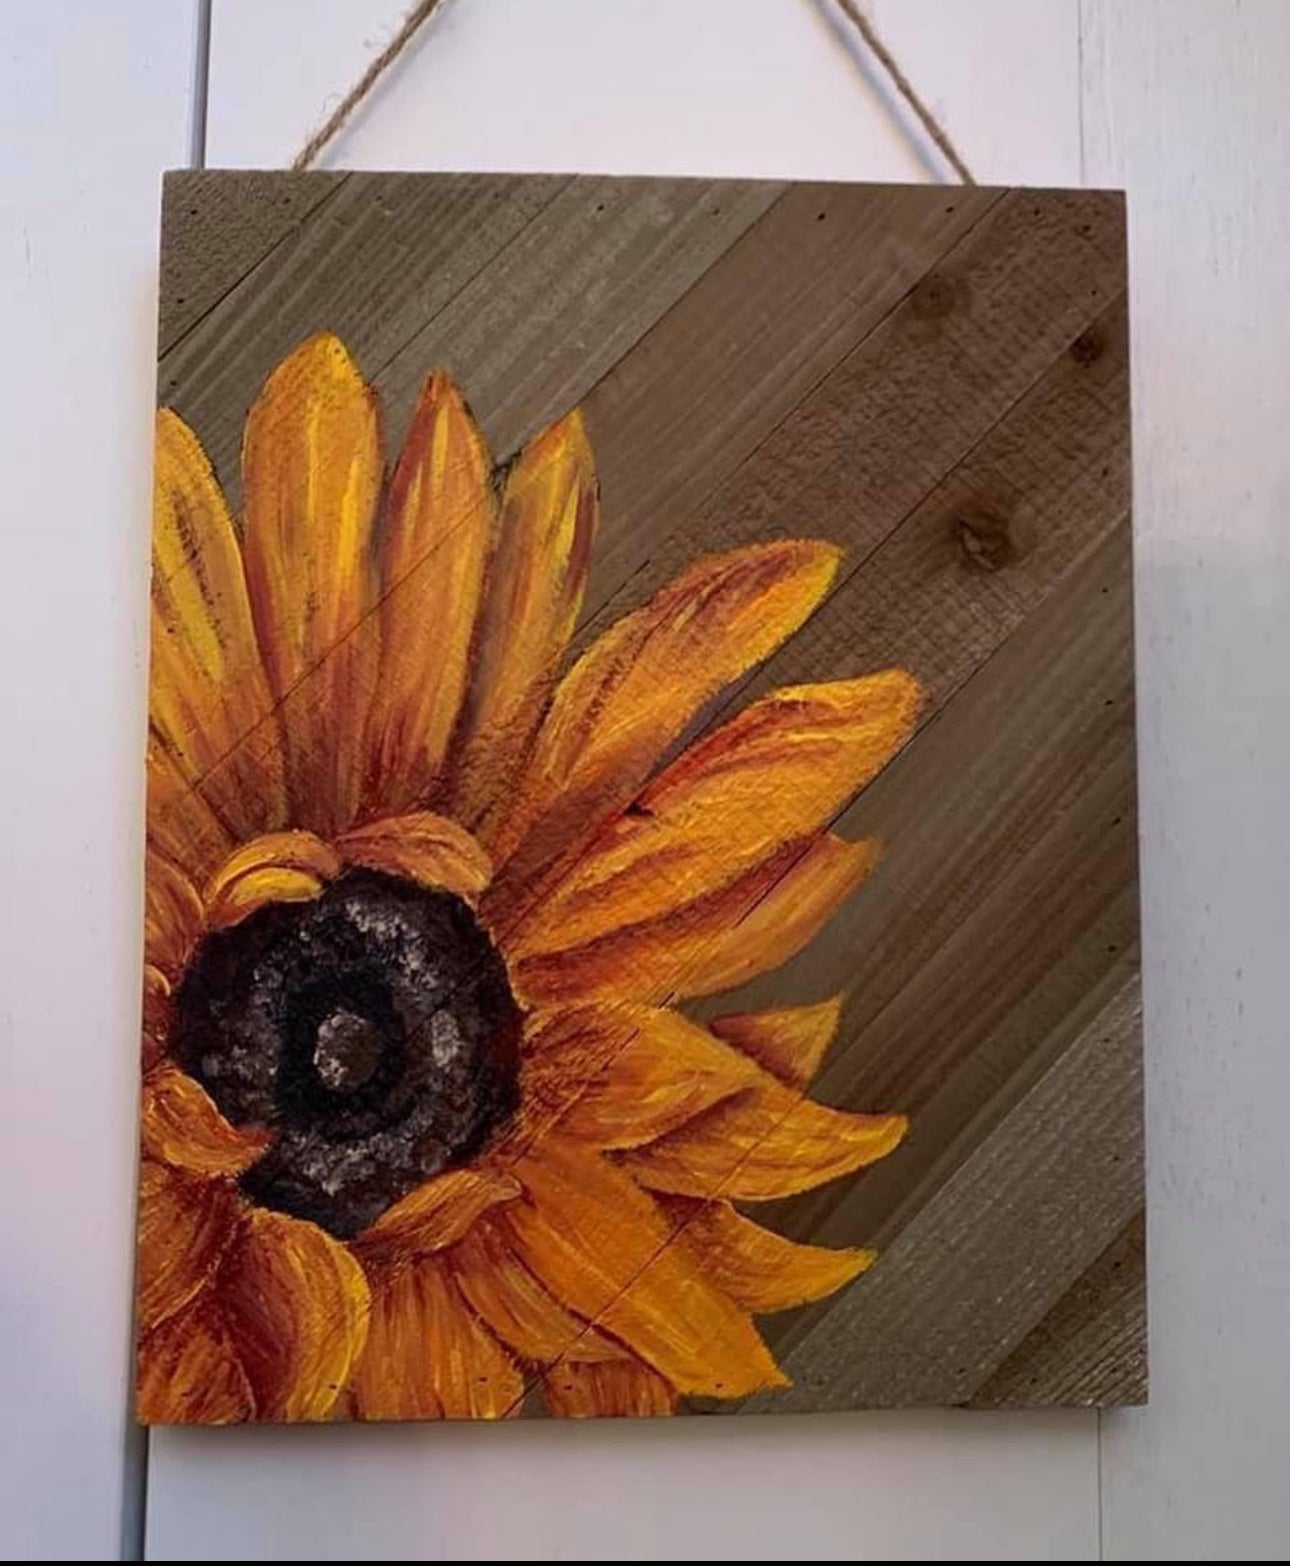 Coming Soon In November! “Sunflower” Paint Night